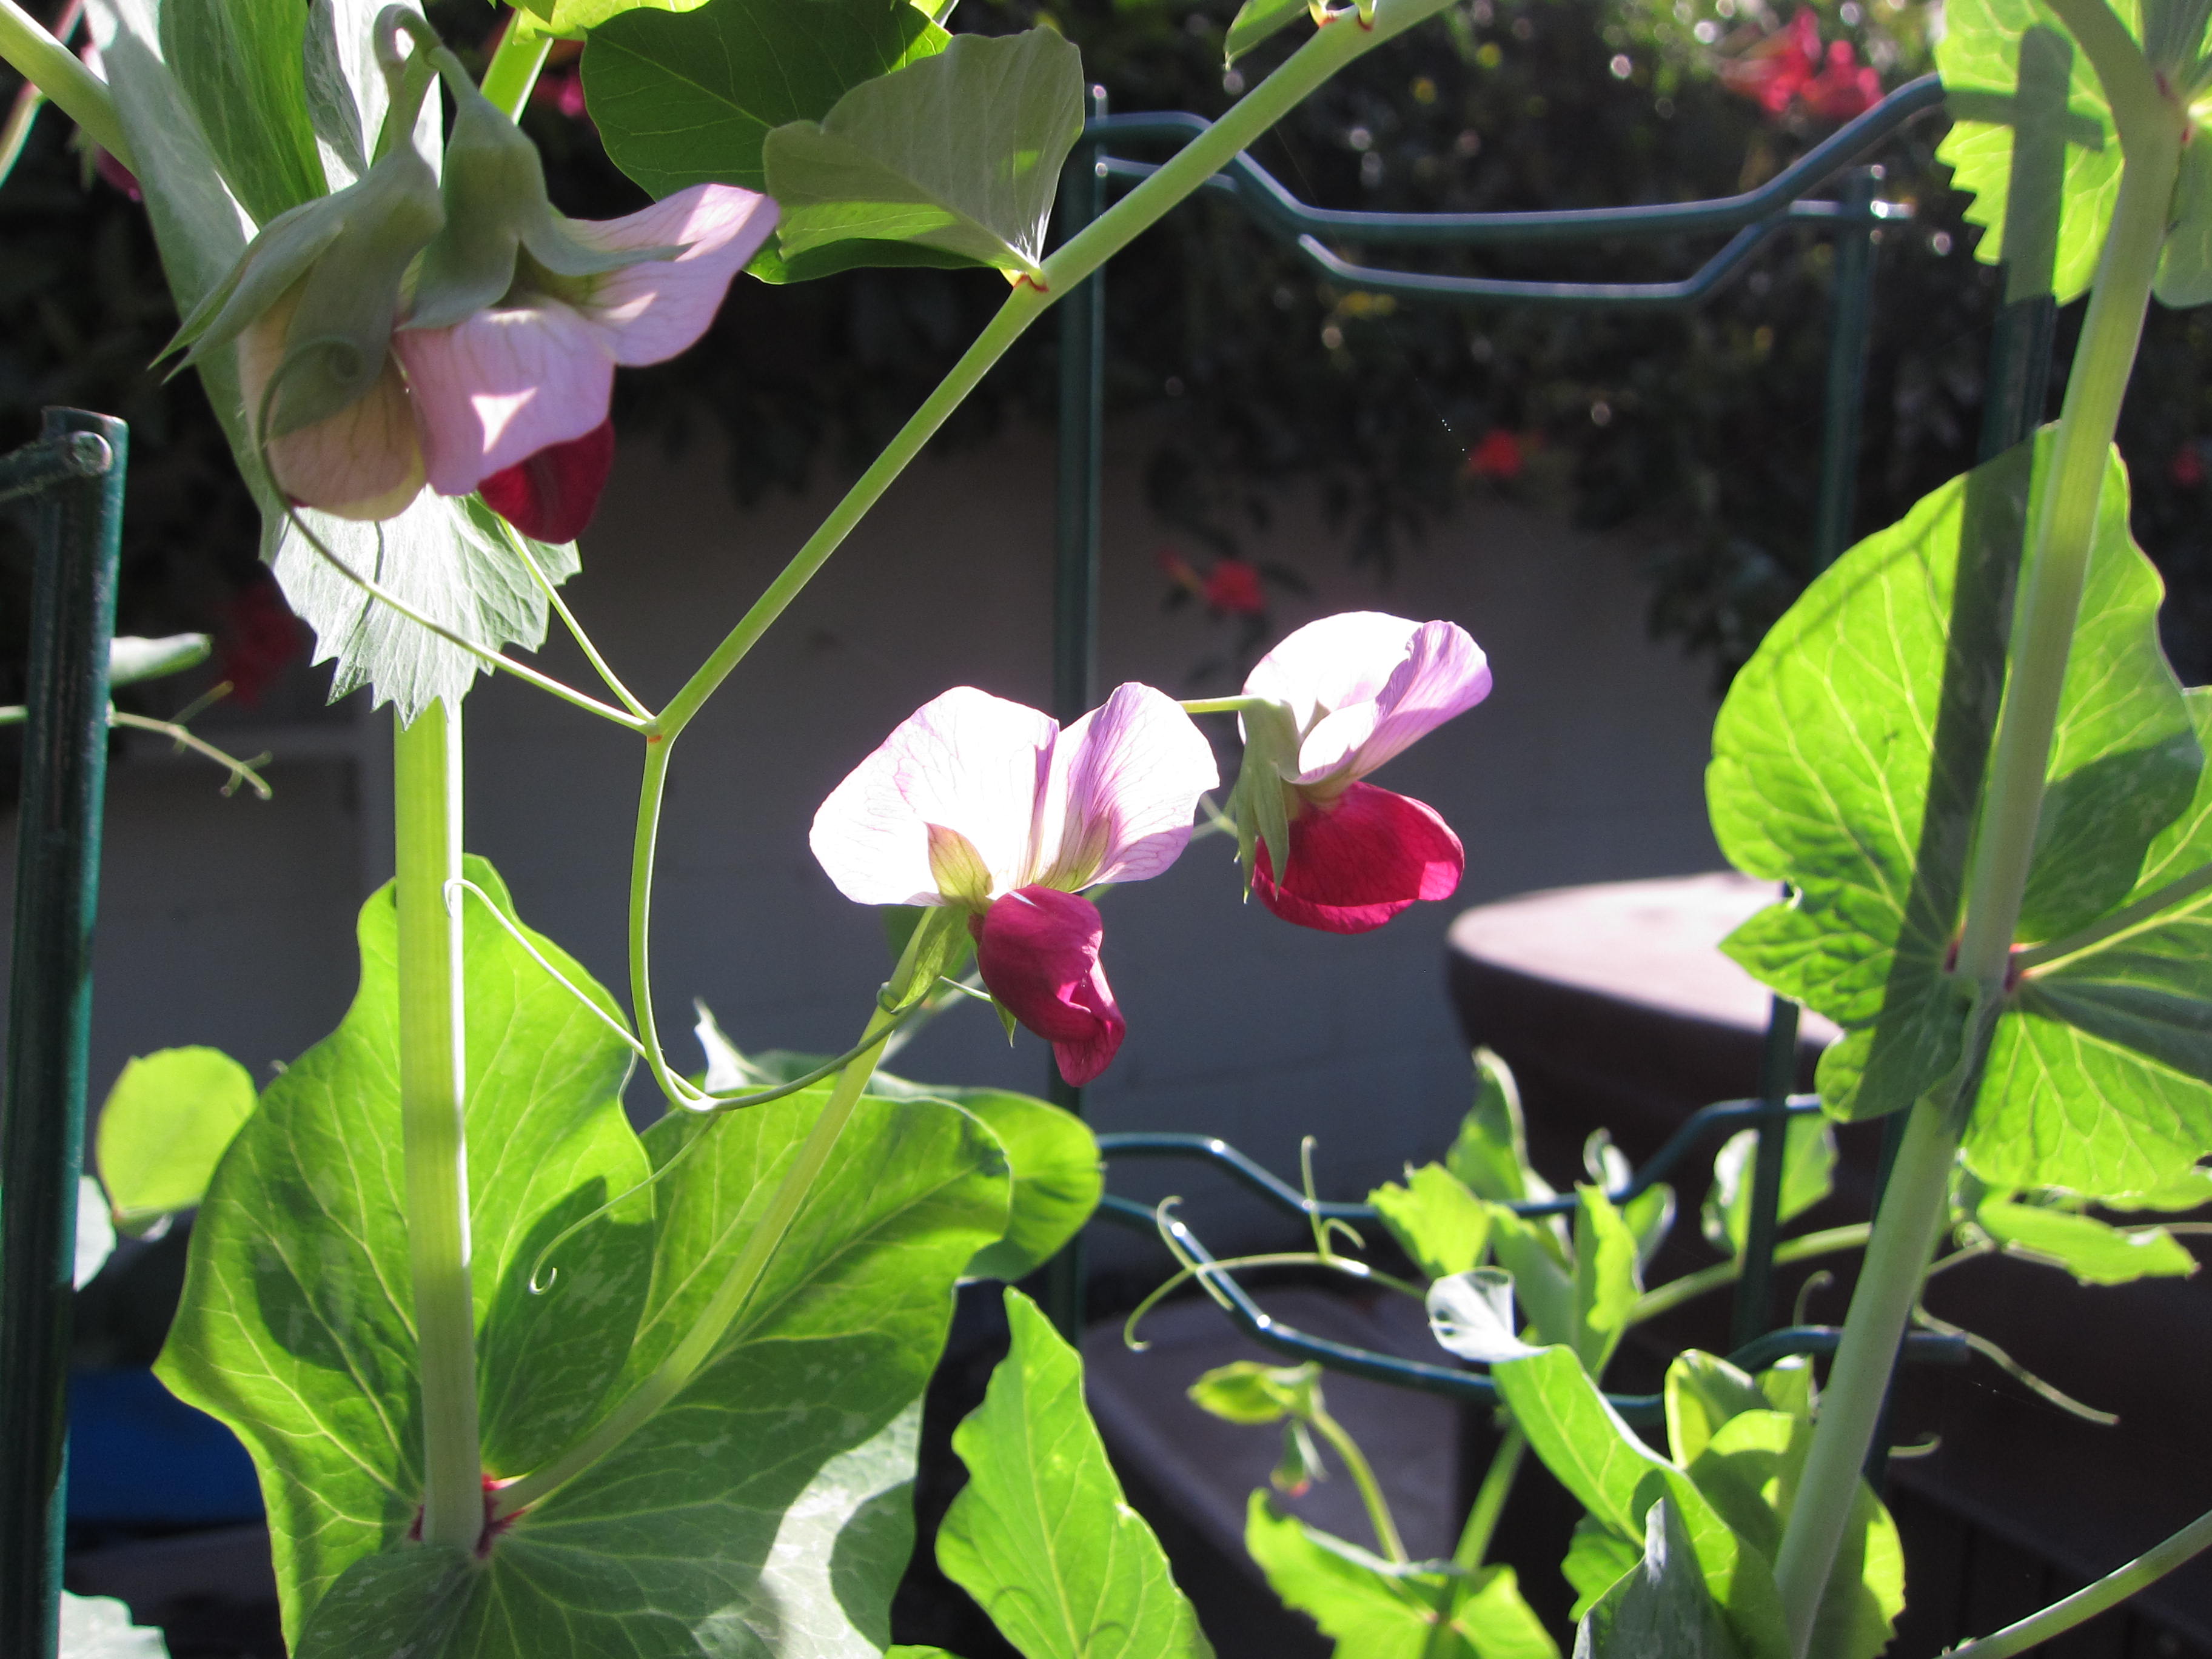 Volunteer peas climb a trellis in the middle of the yard. Any idea which variety these are? Post your guesses below.